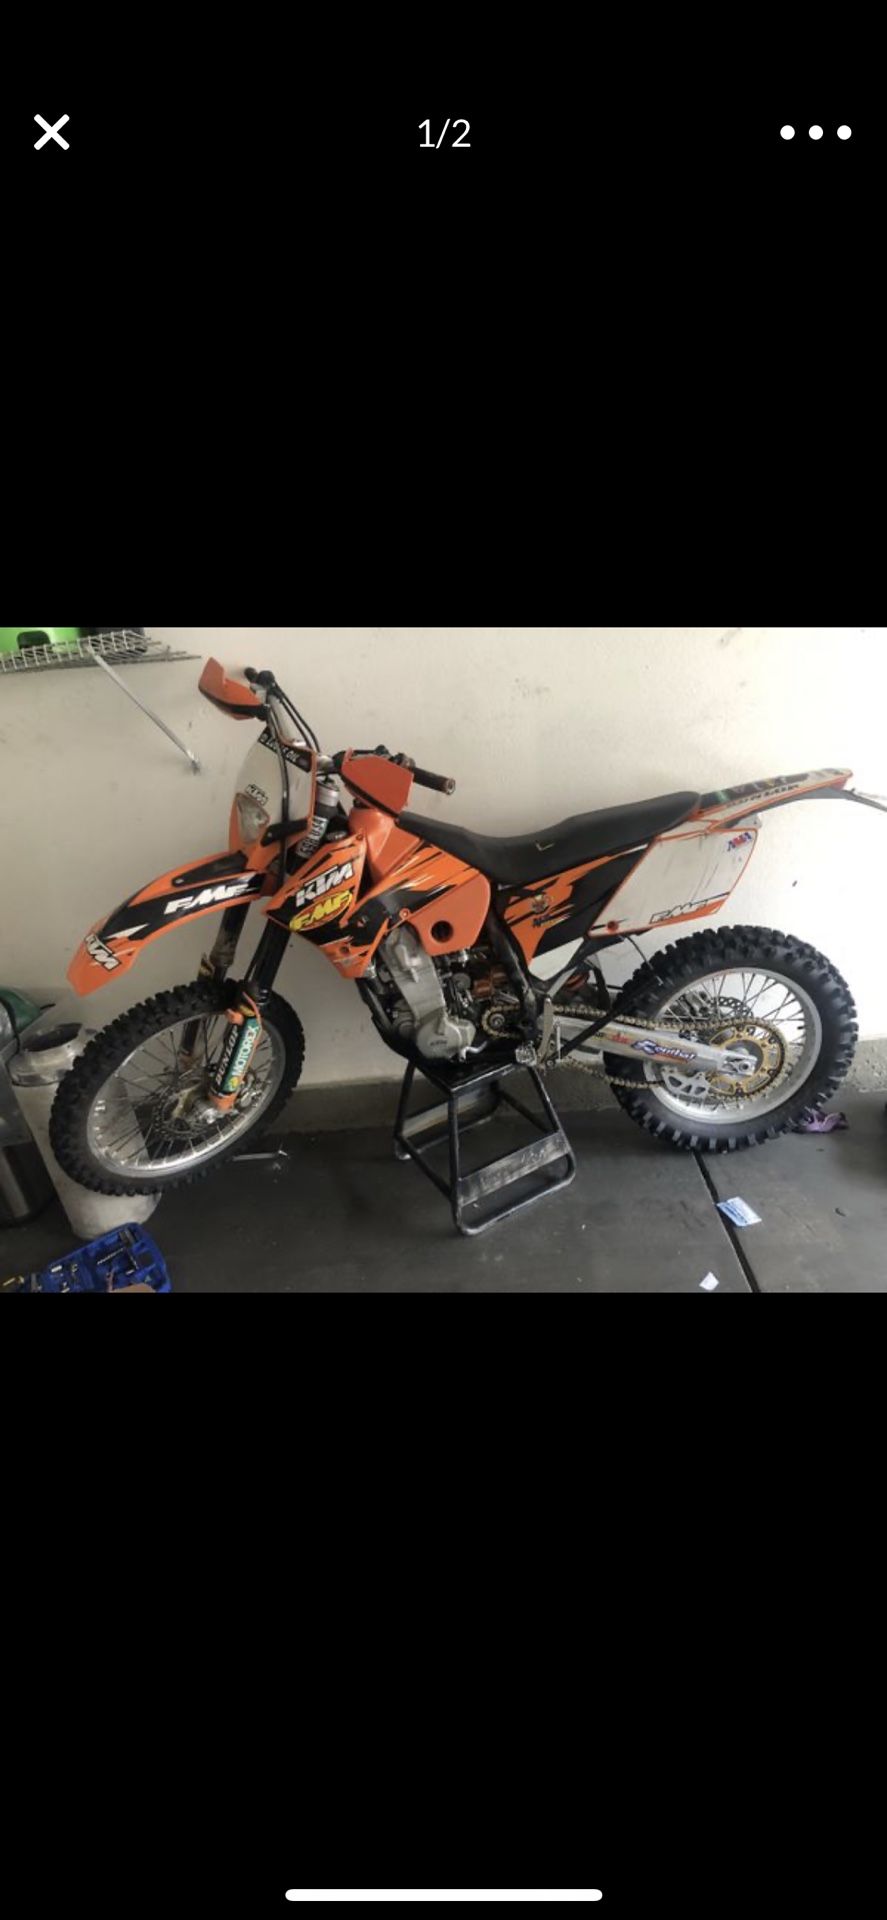 2006 KTM 450 exc plated